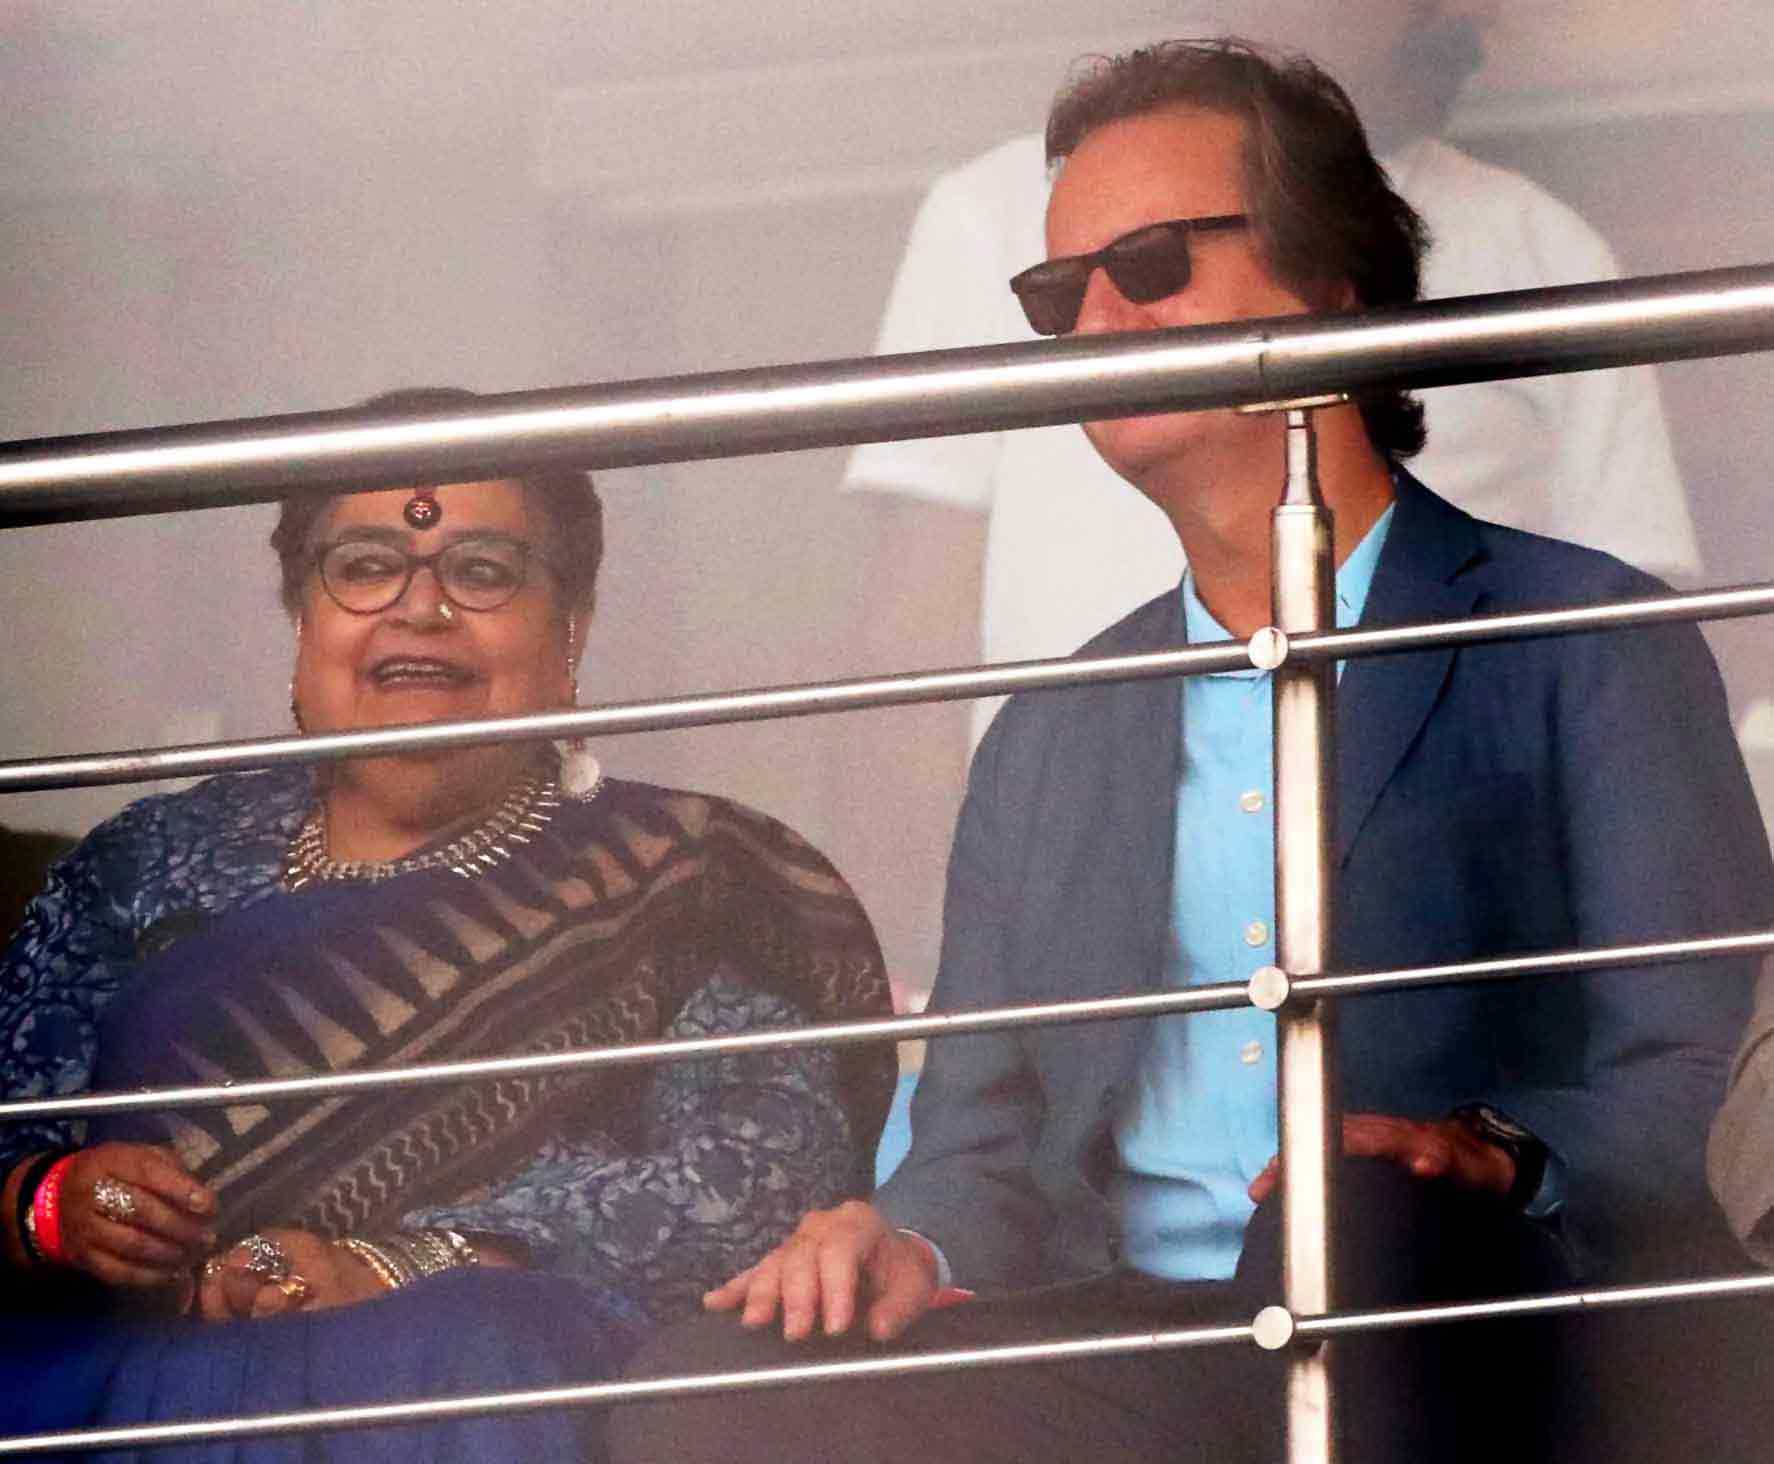 Singer Usha Uthup was spotted at the stadium on Saturday afternoon